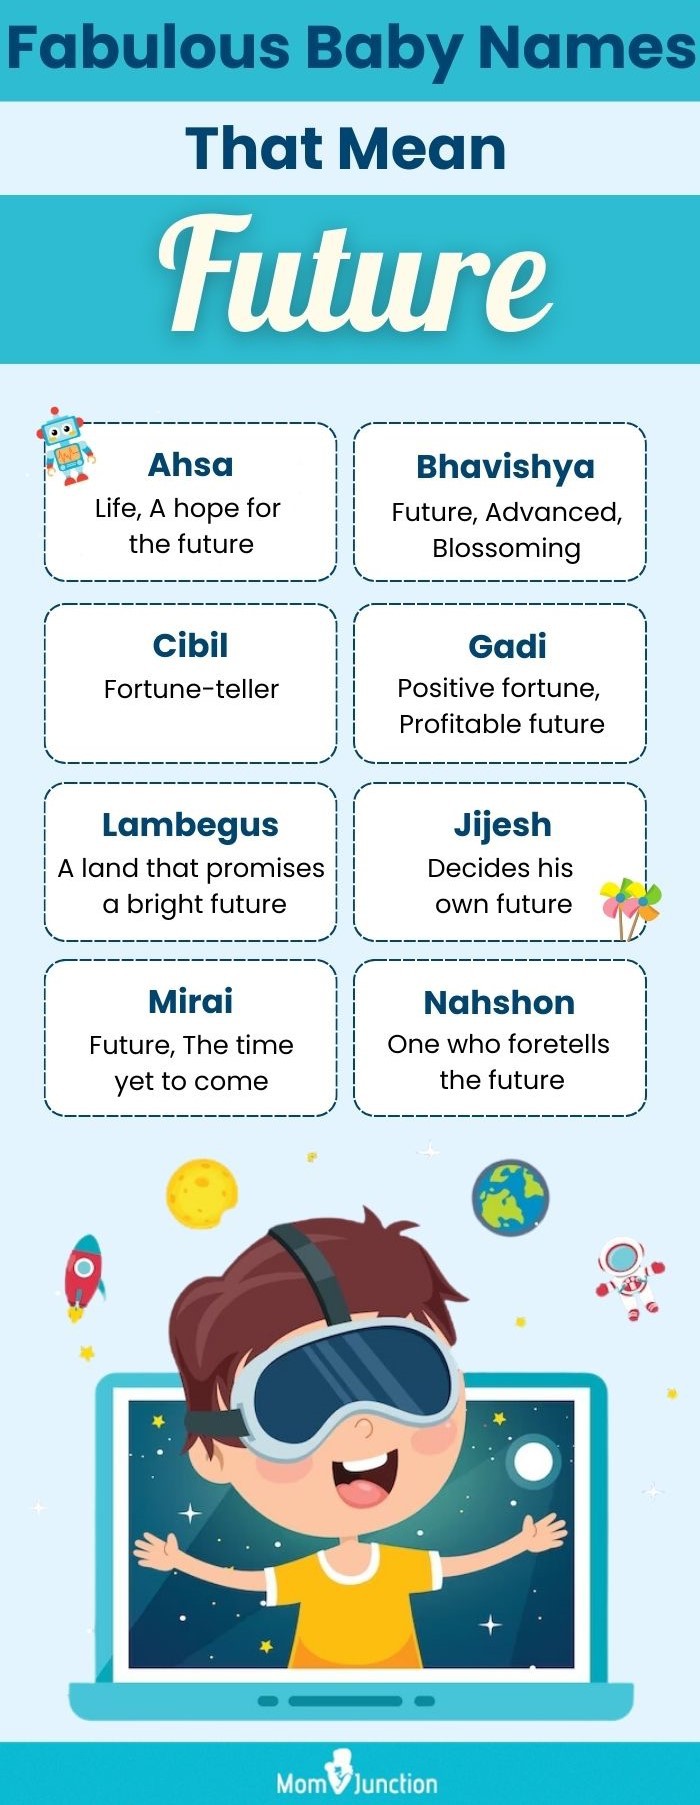 fabulous baby names that mean future (infographic)